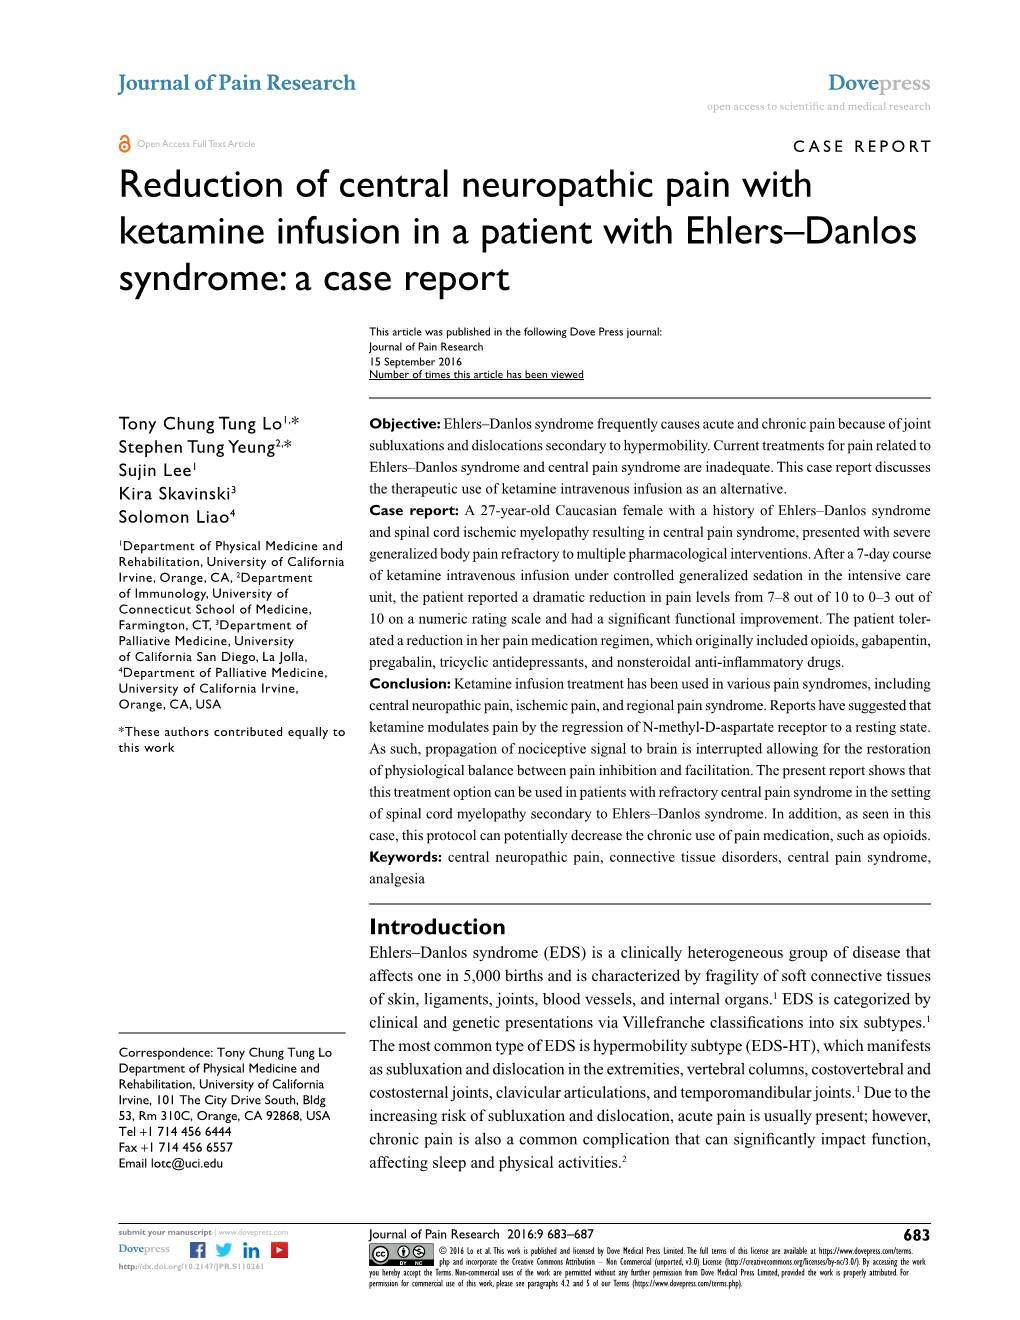 Reduction of Central Neuropathic Pain with Ketamine Infusion in a Patient with Ehlers–Danlos Syndrome: a Case Report